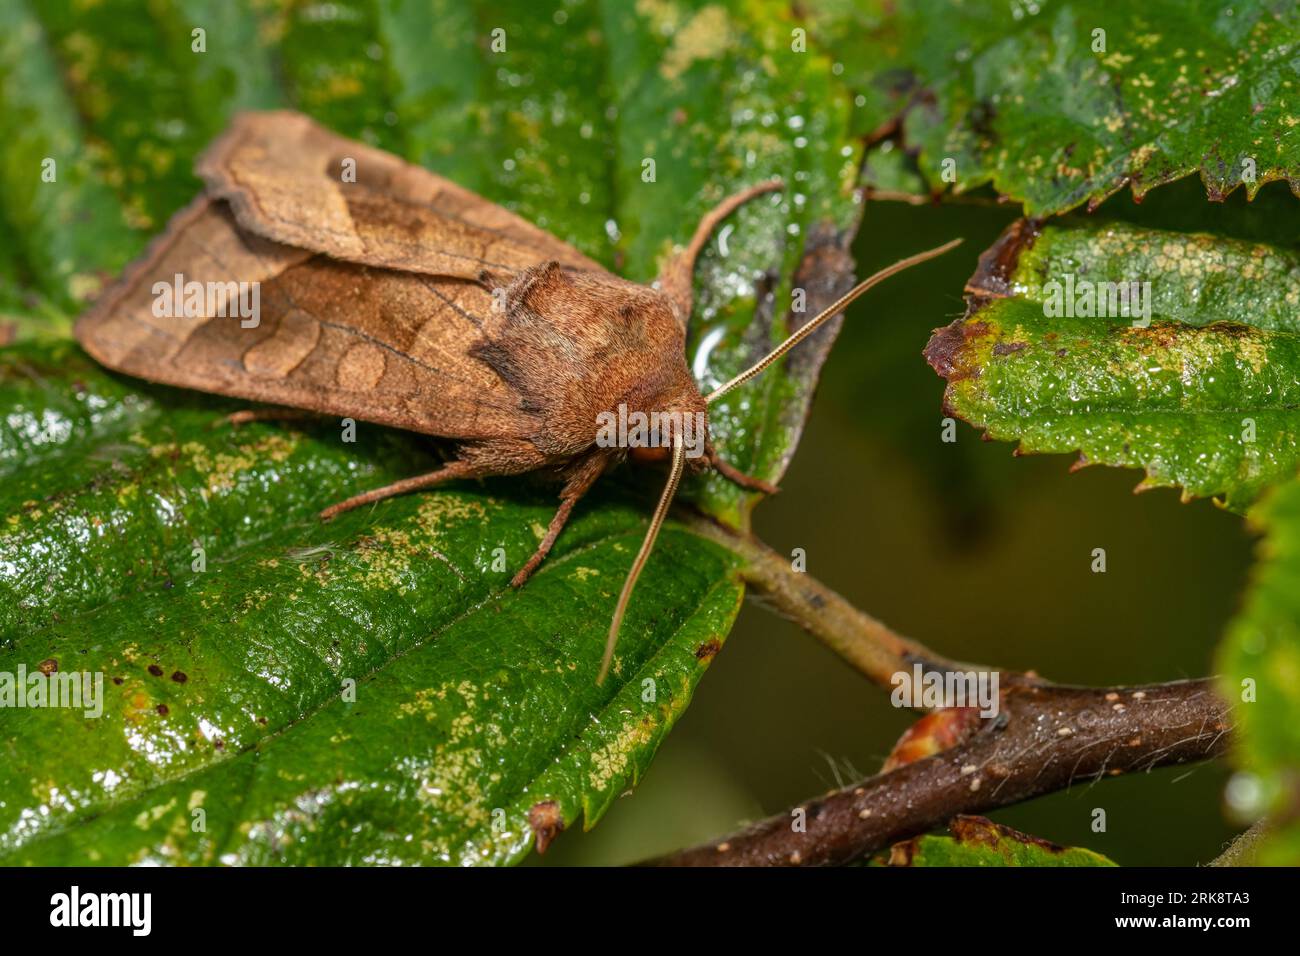 Hydraecia micacea, a rosy rustic moth, resting on a wet leaf in the early morning. Stock Photo